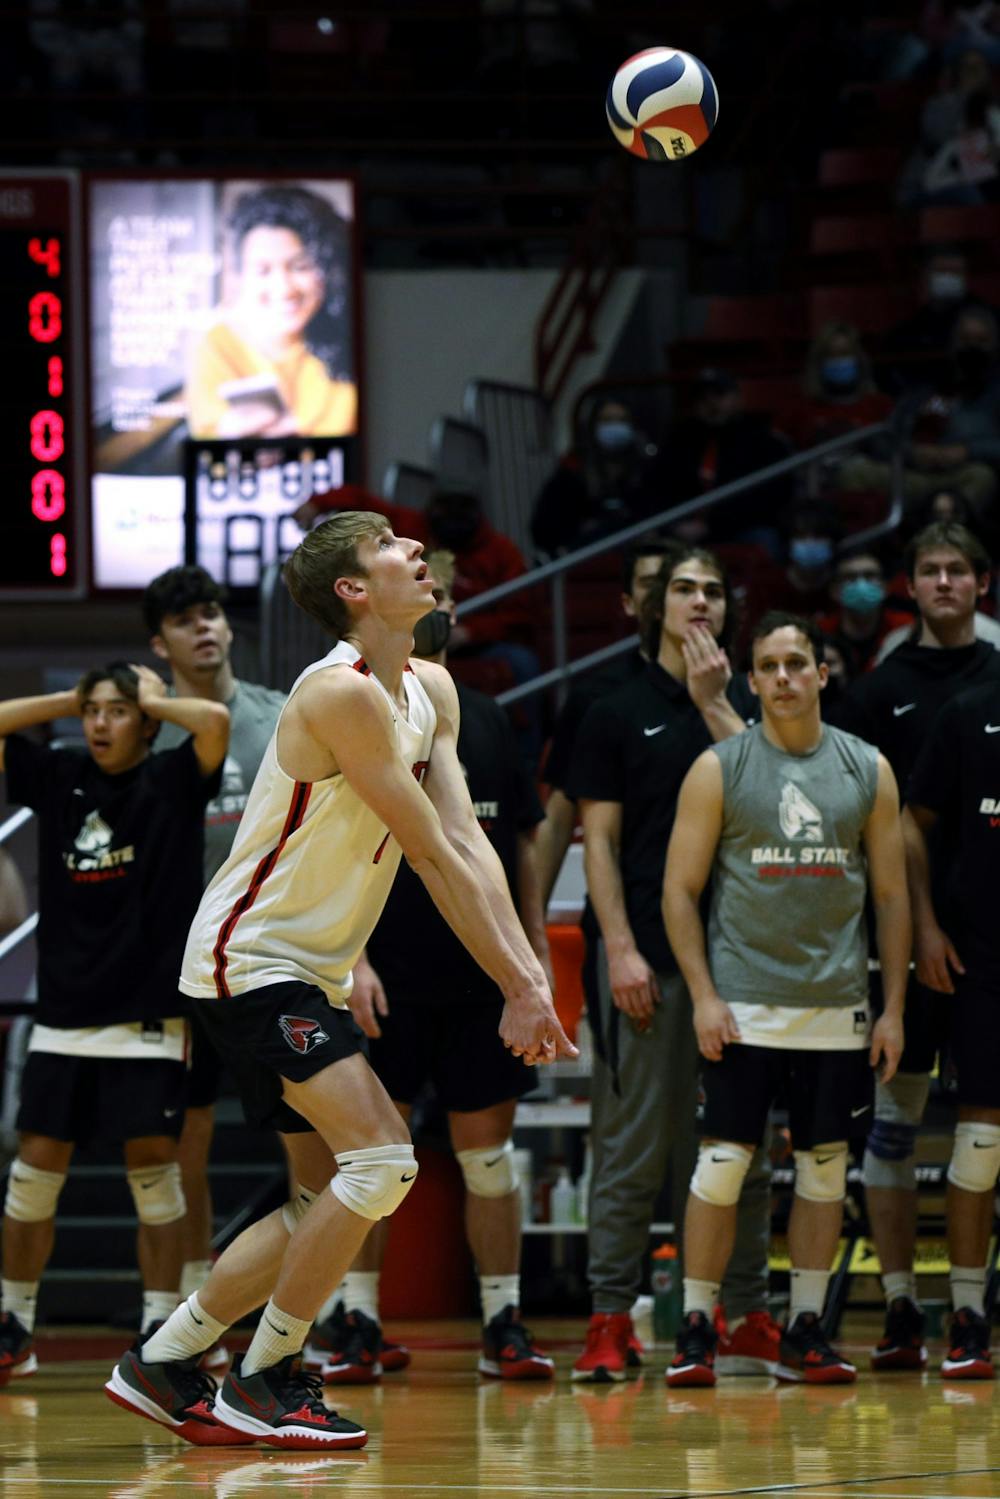 Ball State completes East Coast trip, wins 4th straight